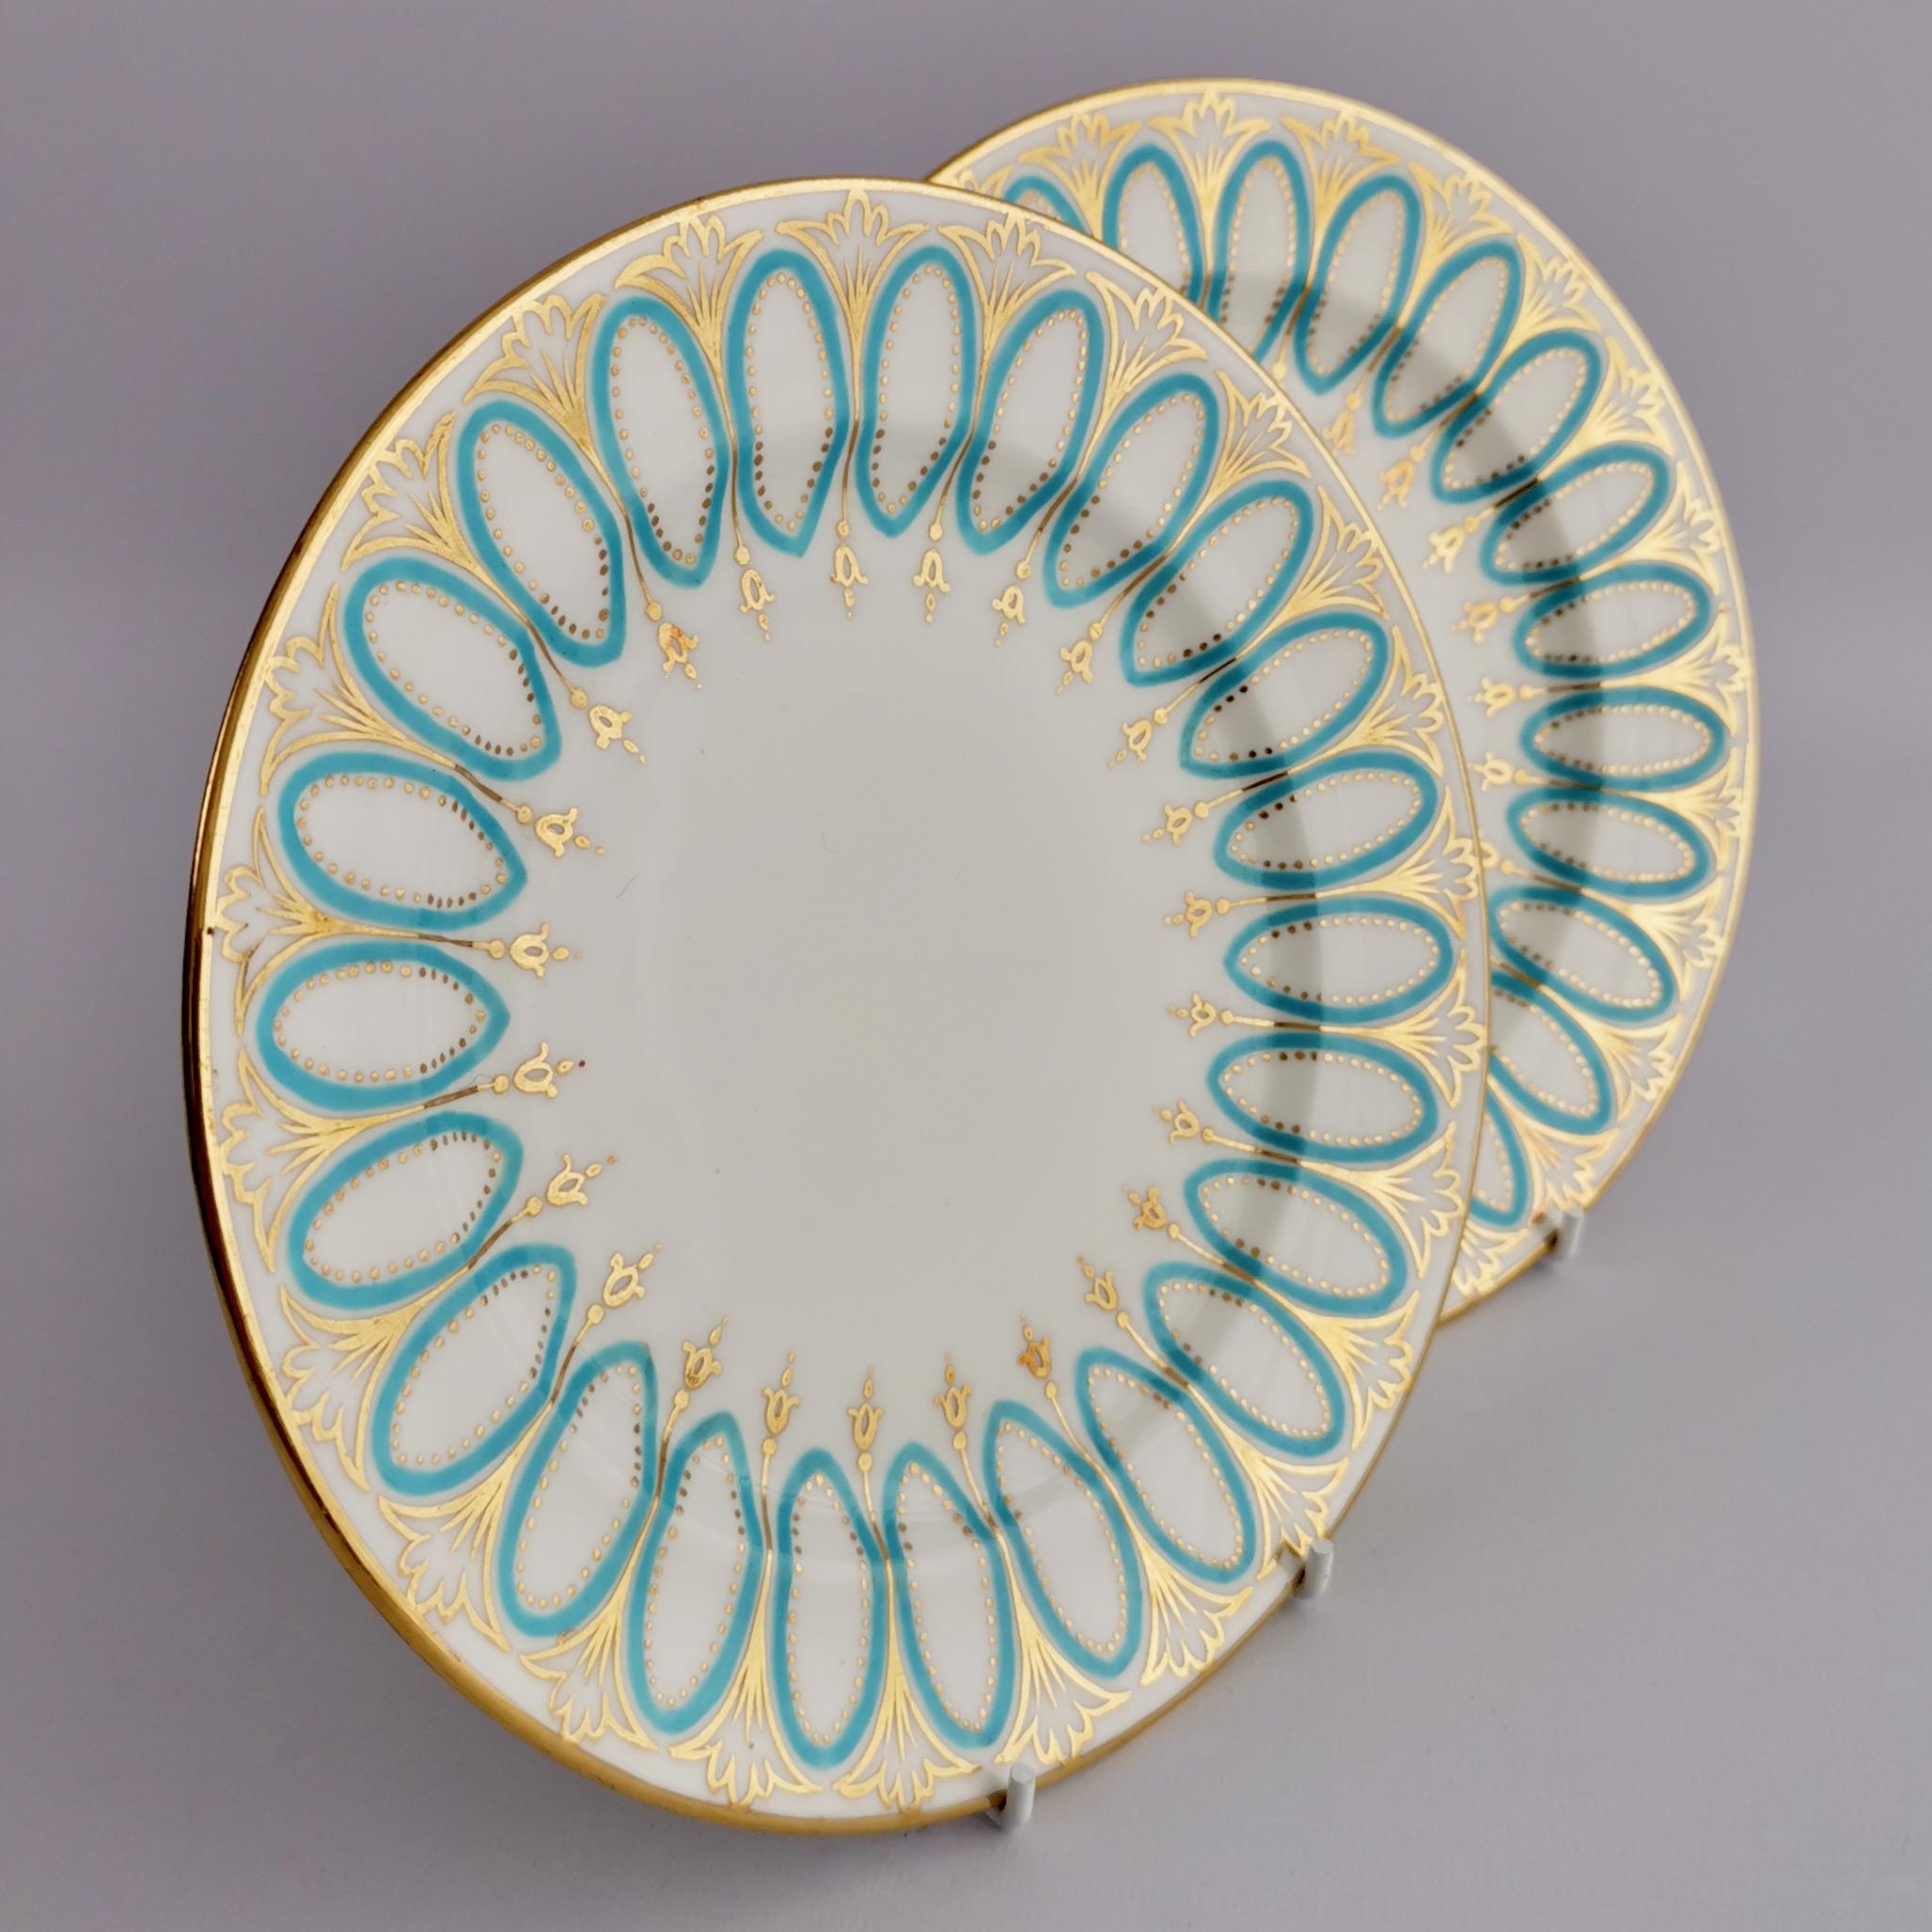 Porcelain Pair of Hammersley Tea Plates, White, Gilt and Turquoise, Edwardian Early 20th C